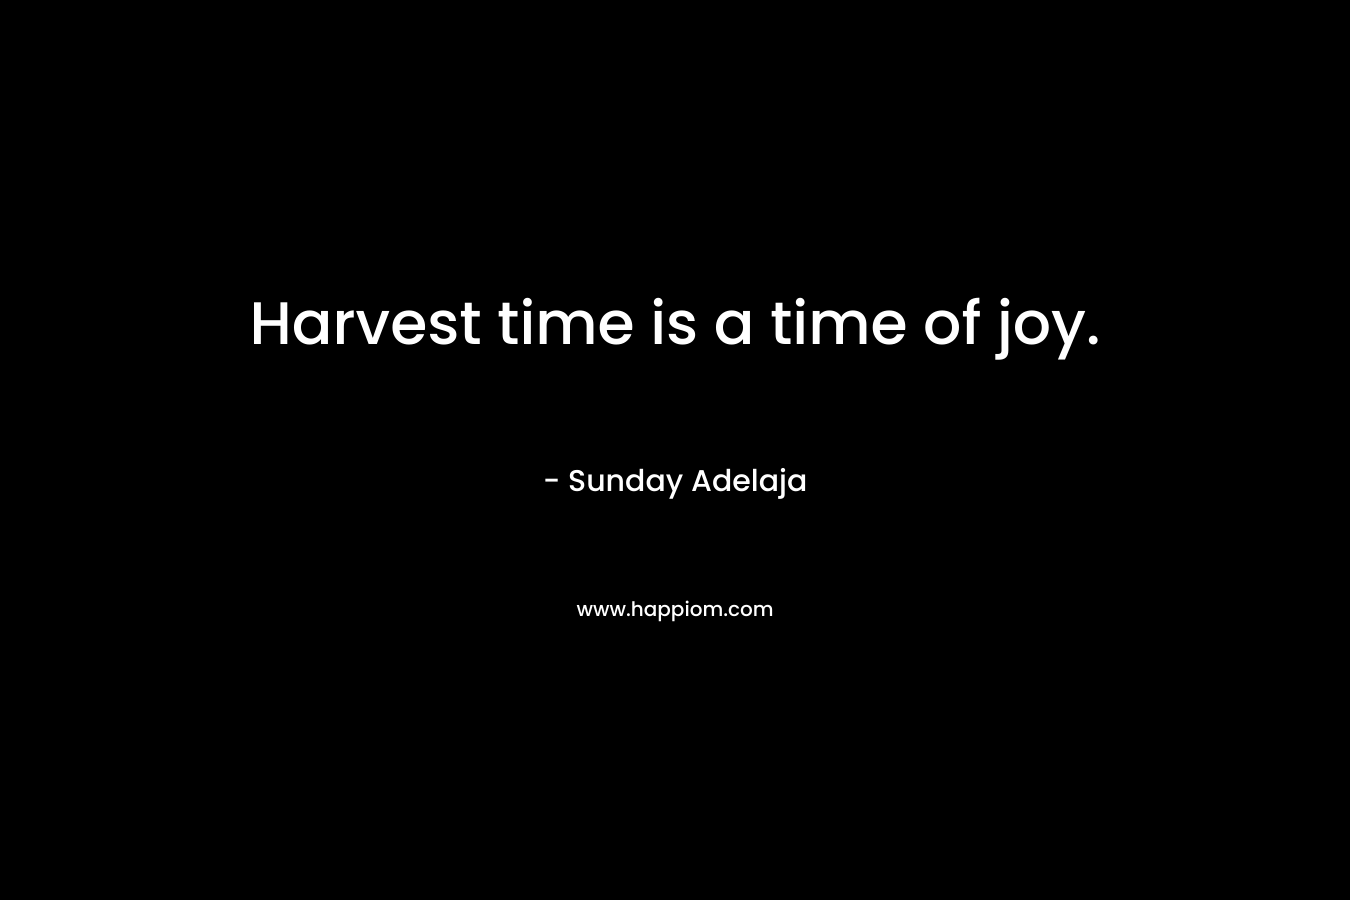 Harvest time is a time of joy.